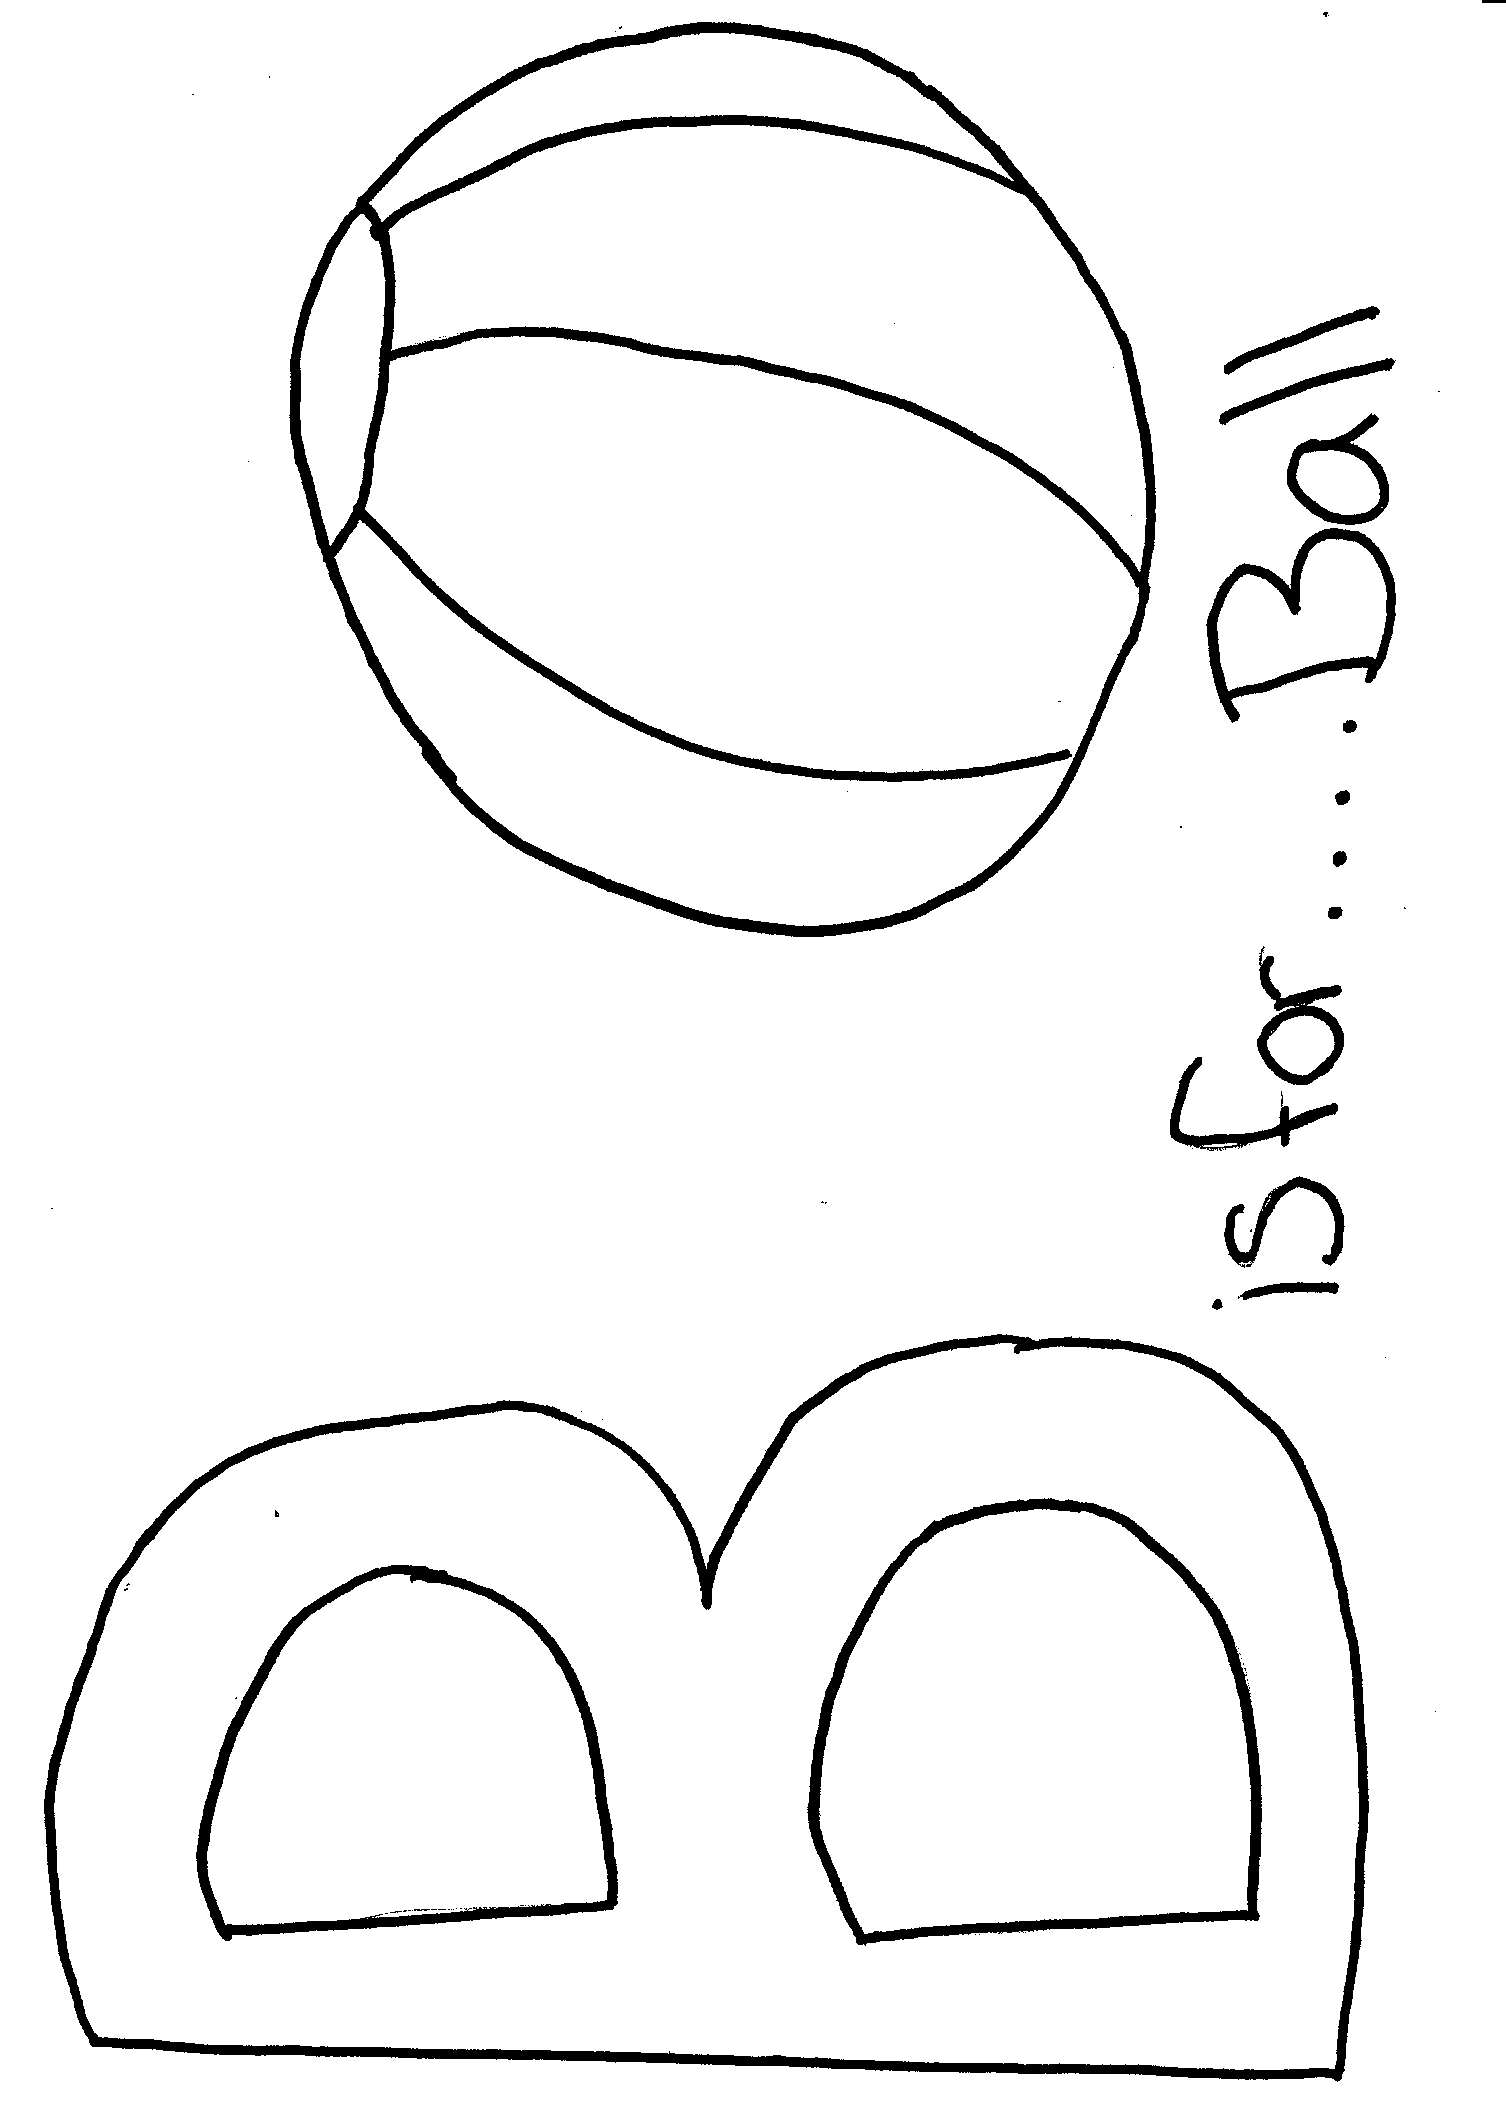 b for ball coloring page learning letter b in the alphabet playing learning coloring page b for ball 